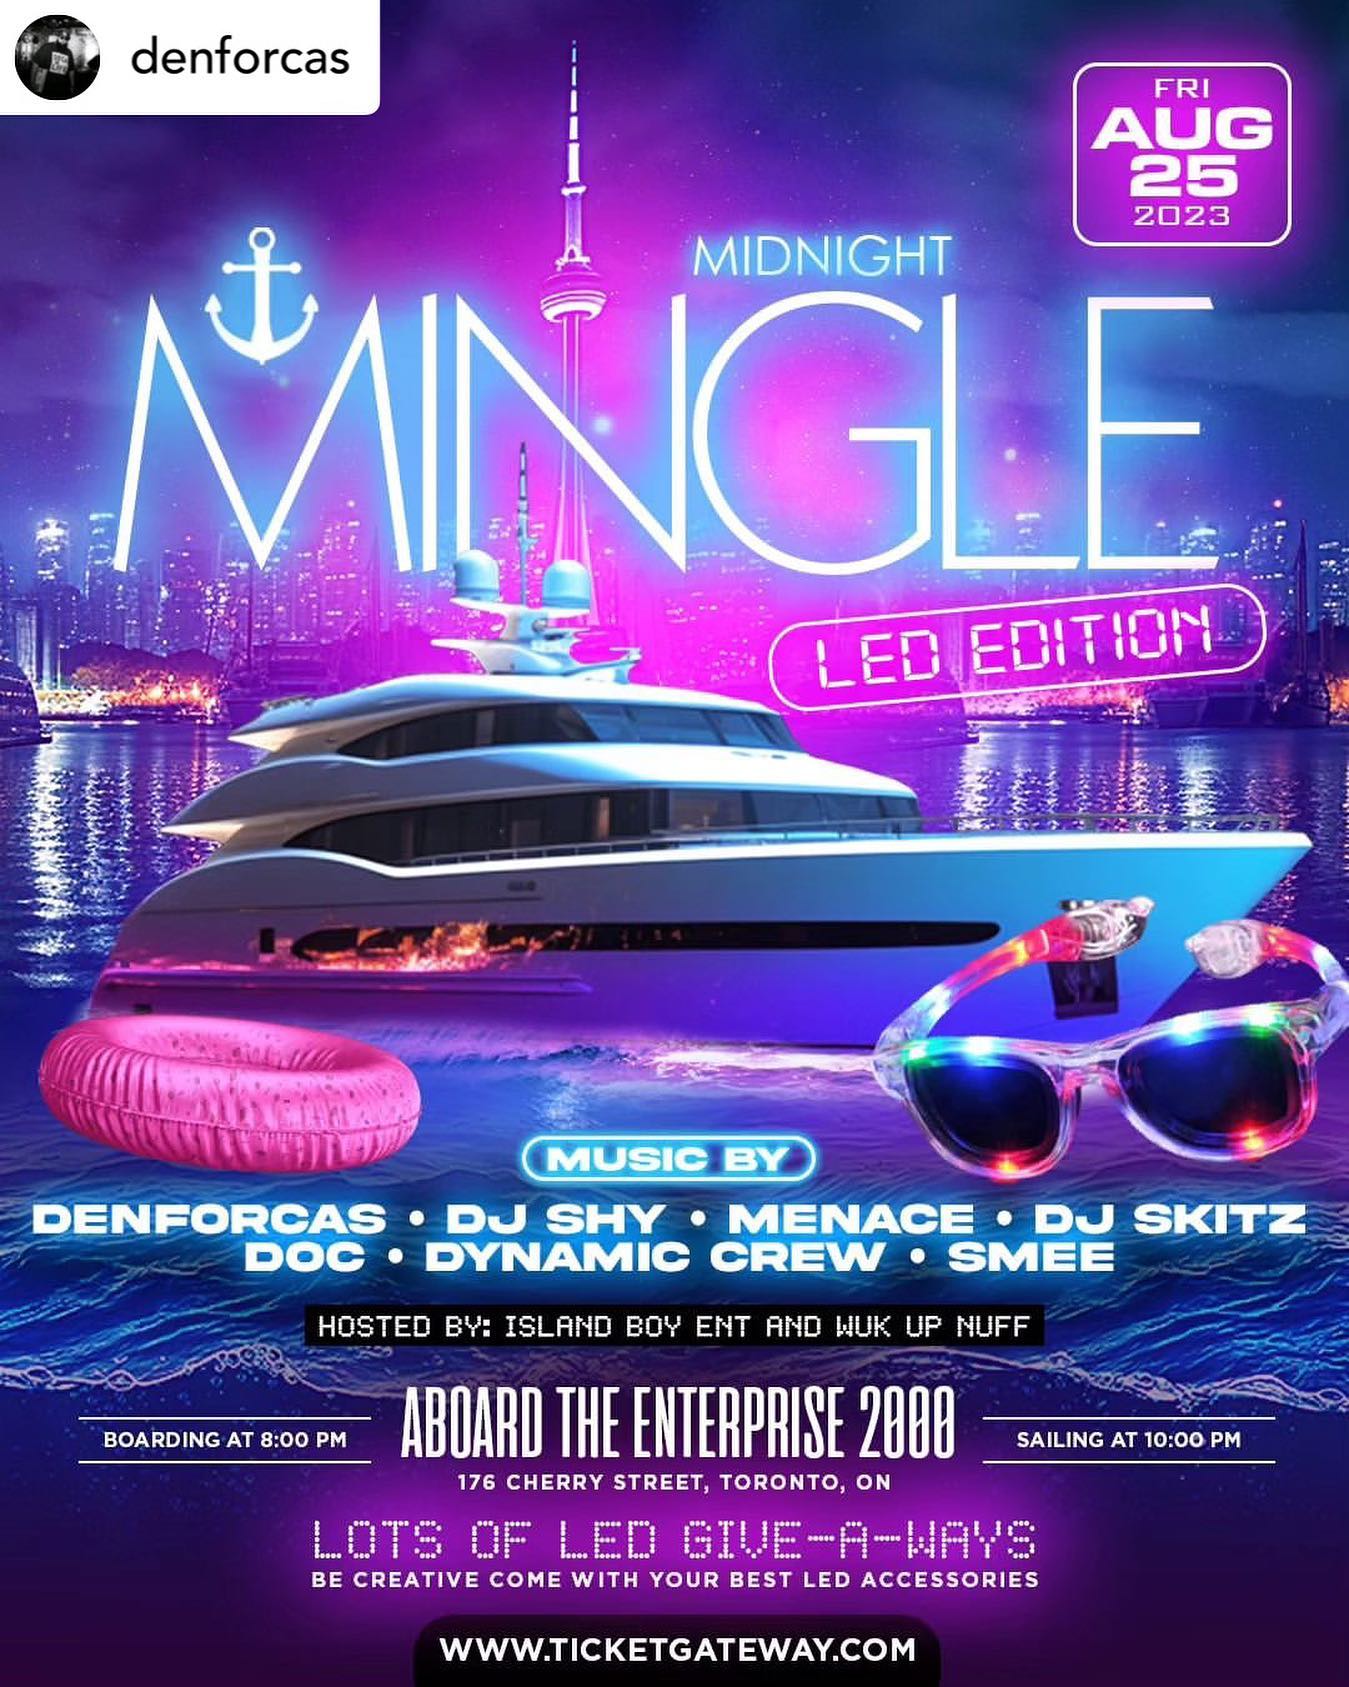 🌘Midnight Mingle Boat Cruise 🌘
Very Sexy, Very Soca  .

Midnight Mingle ~ LED EDITION 

 We are going to light up the SIX"

Friday August 25th 20223
on board
Enterprise 2000 
176 Cherry Street

Music by Toronto's Best:

@denforcas
@dejaydoc
@dynamiccrew4u
@thisisskitz
@incredibledjshy
@itsmenacethedj
@bassline_denforcas
@mcsmee1
@wukupnuff 
@islandboyentertainment_

Ticketss $65 with food
Boarding 8:00pm SHARP
Leaving @ 9:30 pm | 19+ Event

We are going to light up the 6ix

Tickets & Info:
647.818.6364
416.220.4702

Tickets:

https://www.ticketgateway.com/event/view/midnight-mingle-2023

THIS IS ONE BOAT CRUISE YOU DO NOT WANT TO MISS!!!